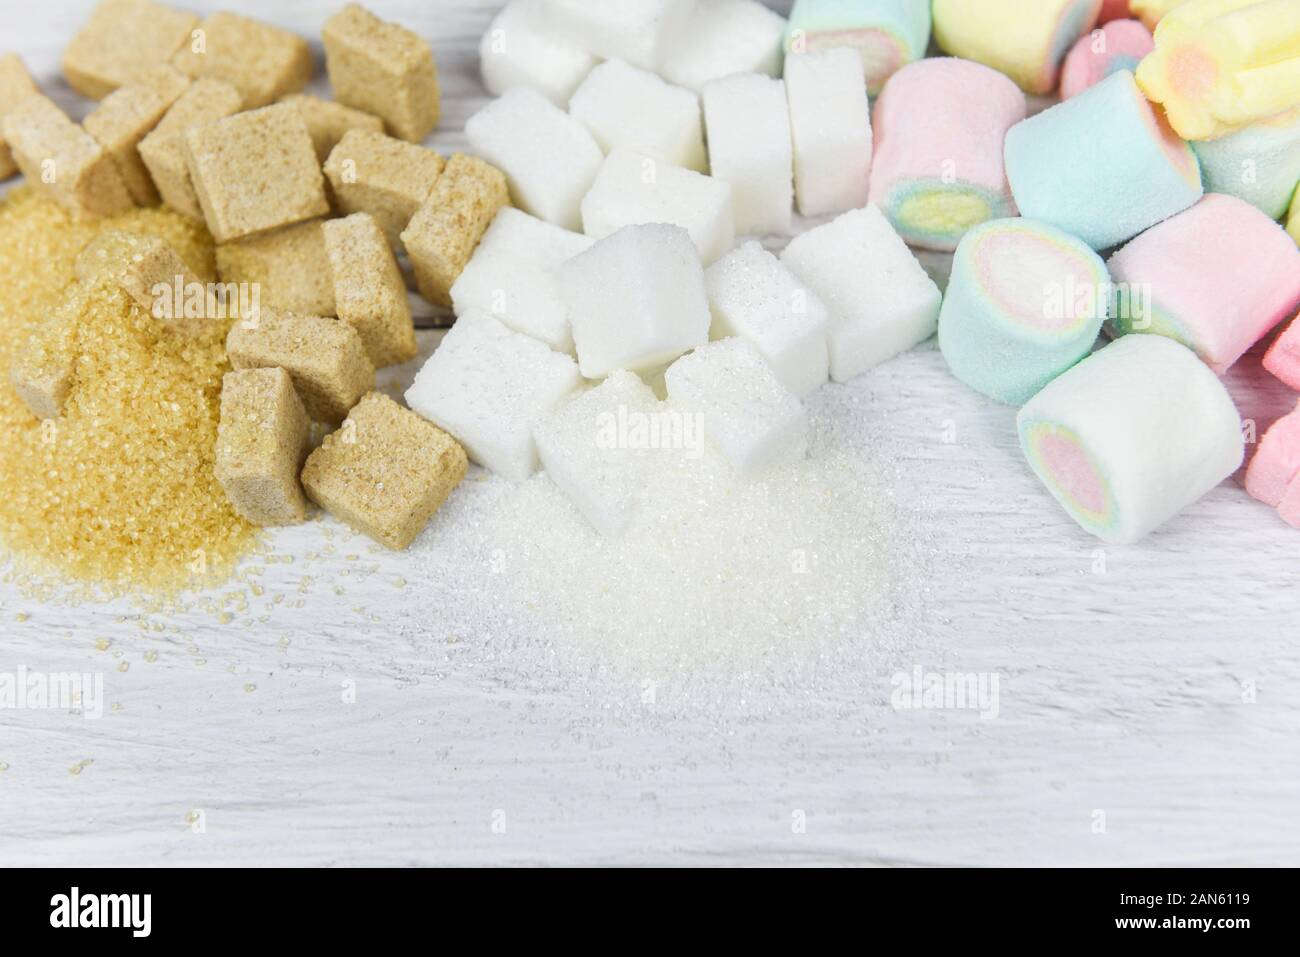 Brown sugar , White sugar , sugar cubes and colorful candy sweet on the table background / No sugar in diet causes obesity diabetes and other health p Stock Photo